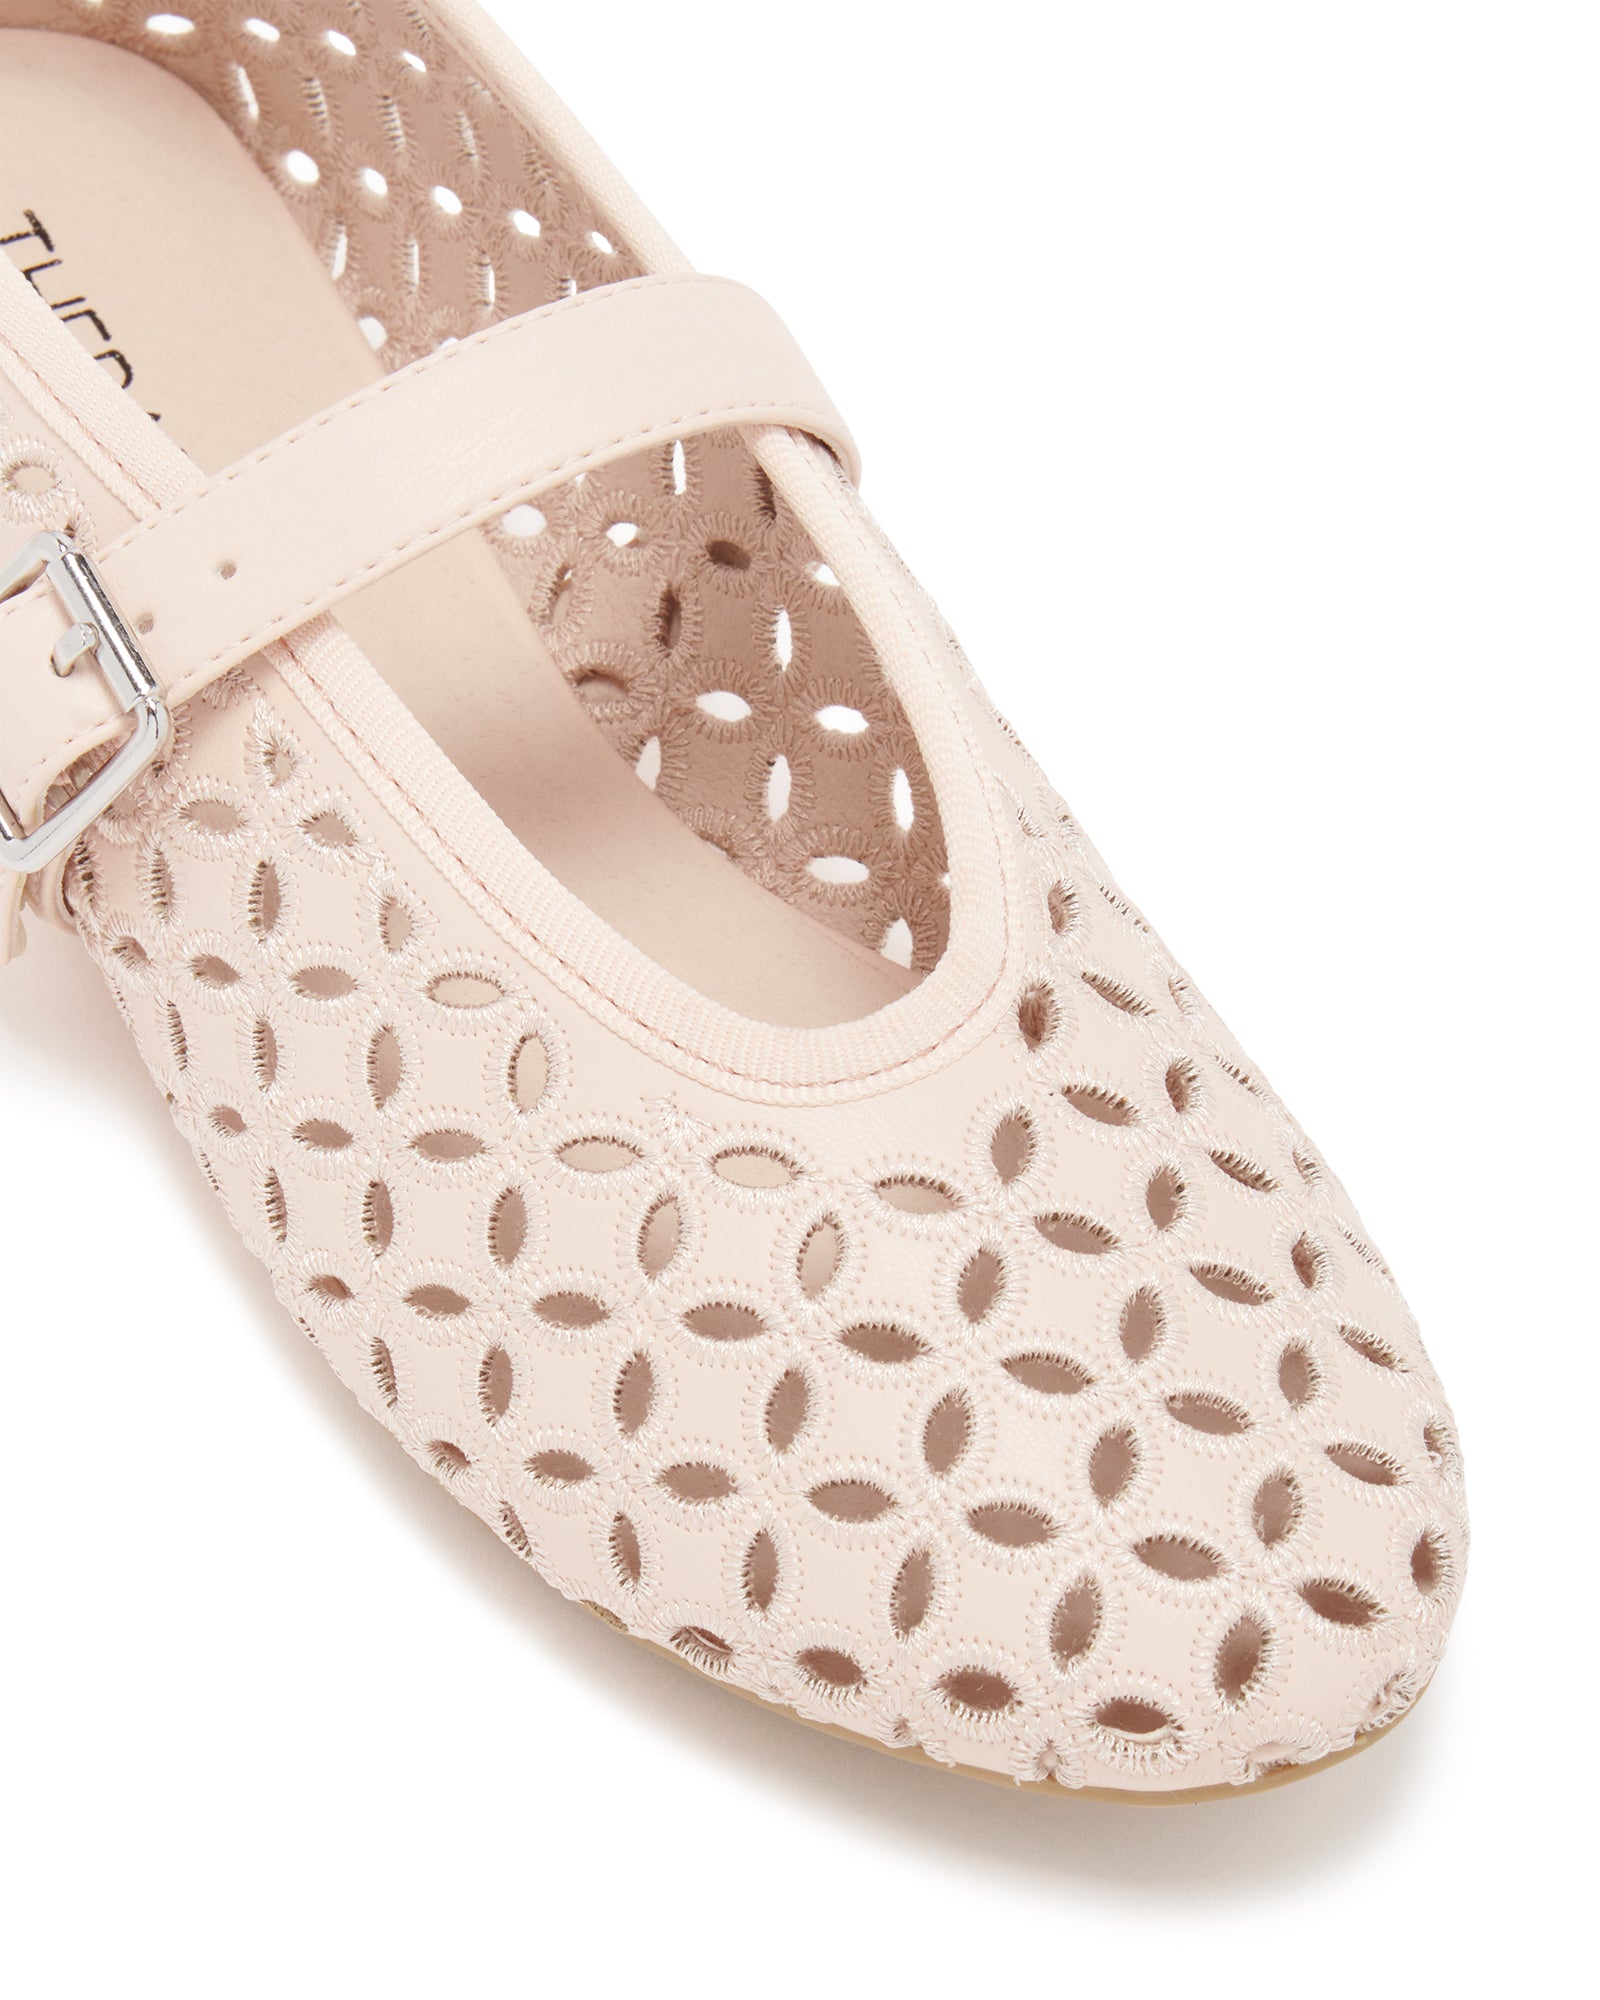 Therapy Shoes Amara Blush Smooth | Women's Flat | Ballet | Cut-Out